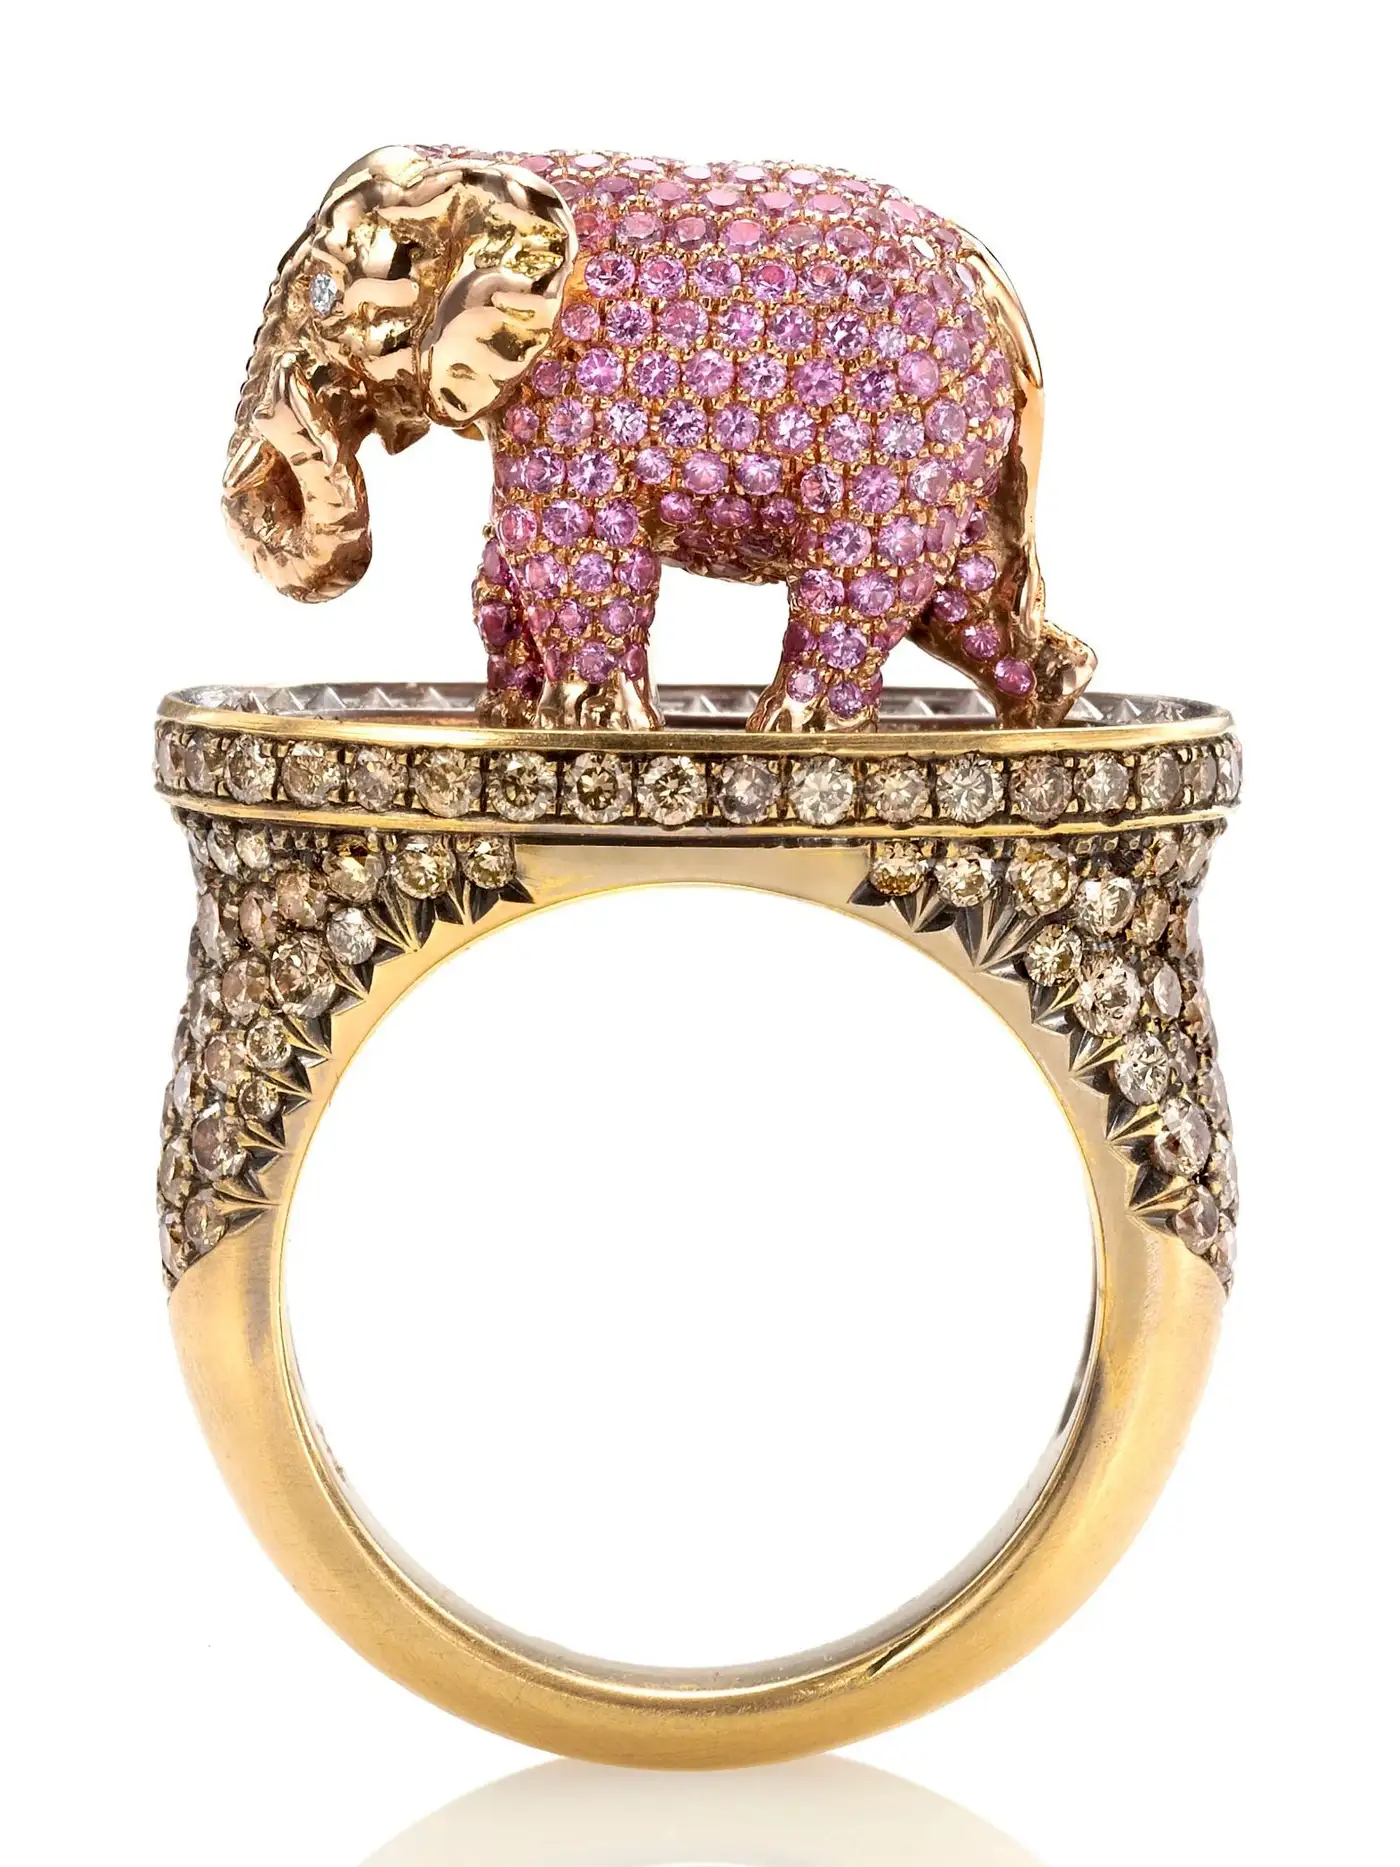 Wendy-Brandes-7-Ring-Diamond-and-Coloured-Gemstone-Animal-Design-Collection-7.webp